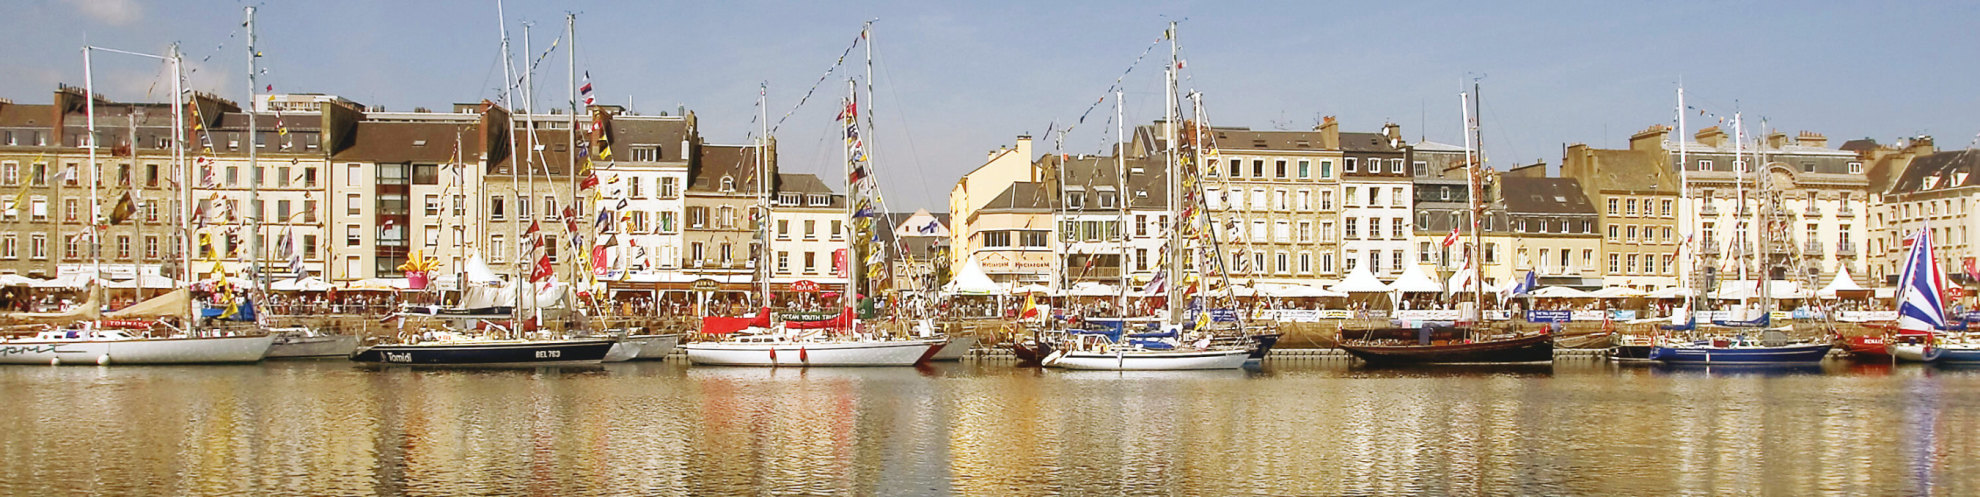 A view of the Cherbourg harbour